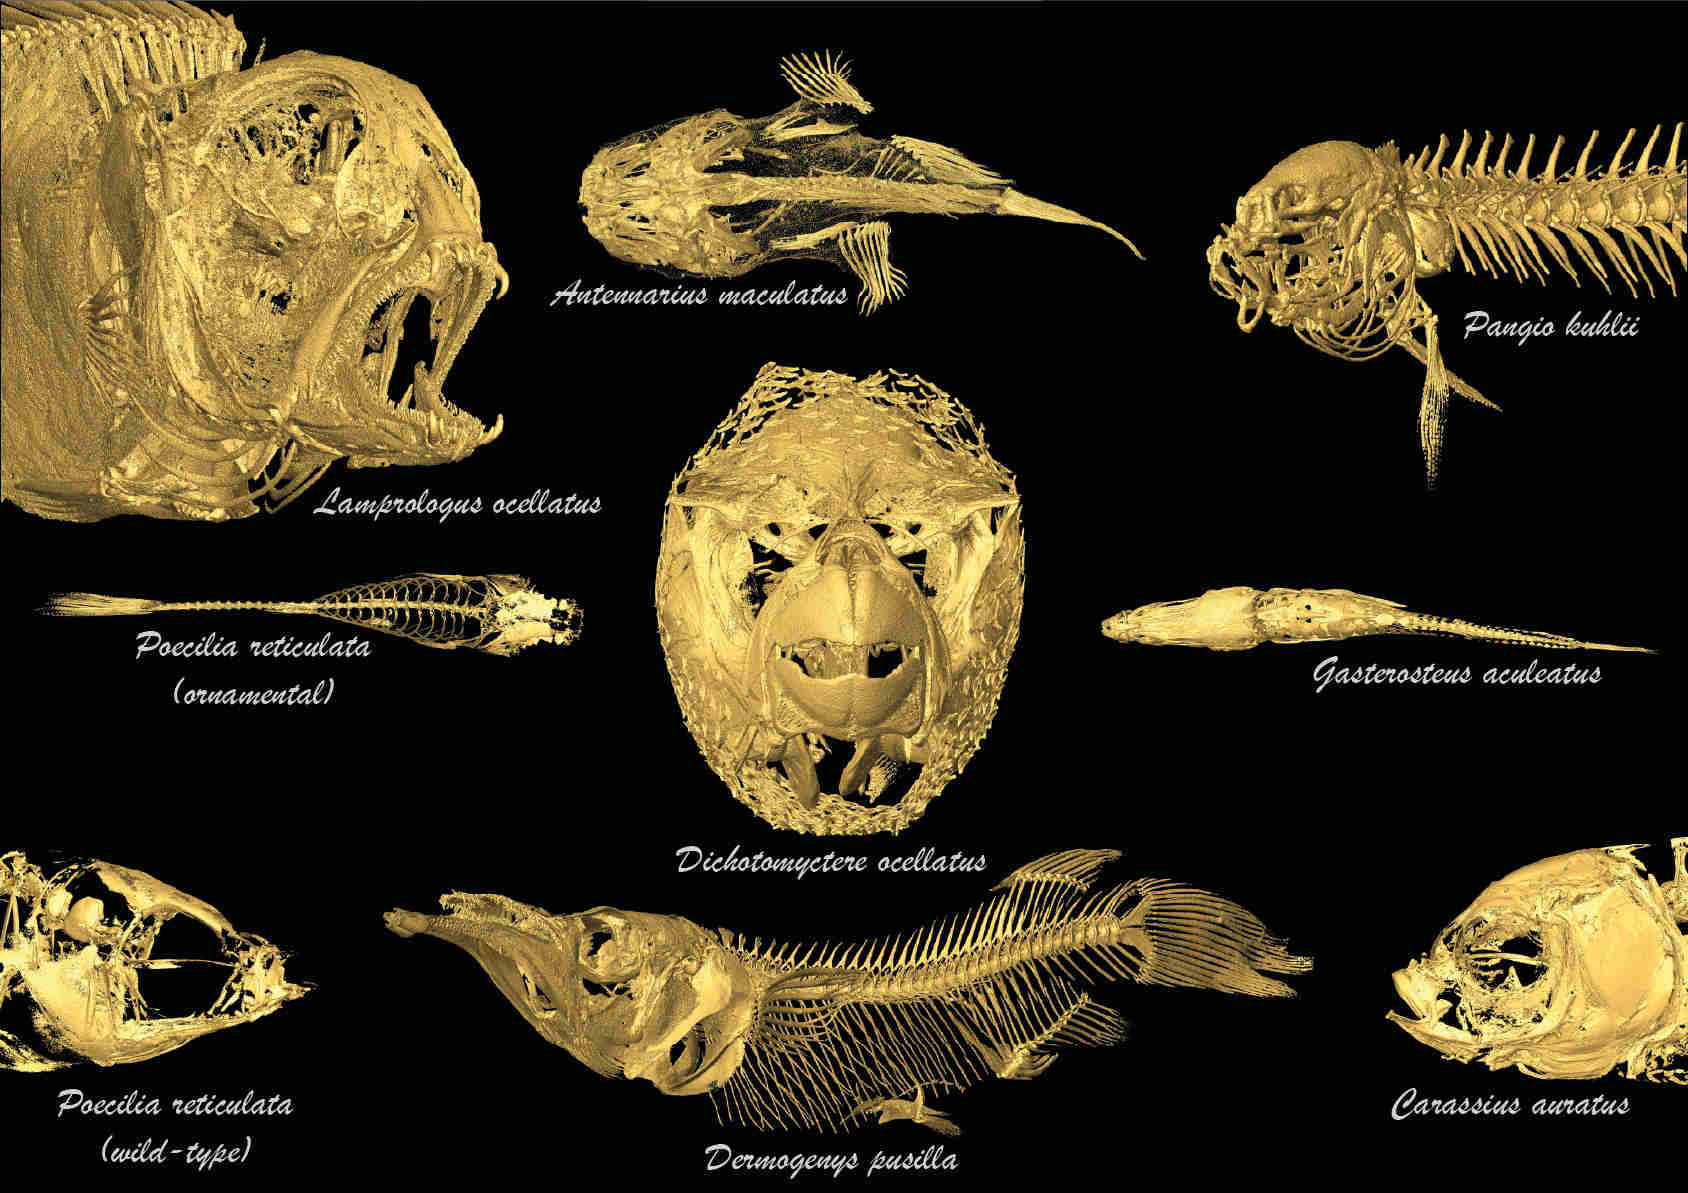 CT scans of fishes